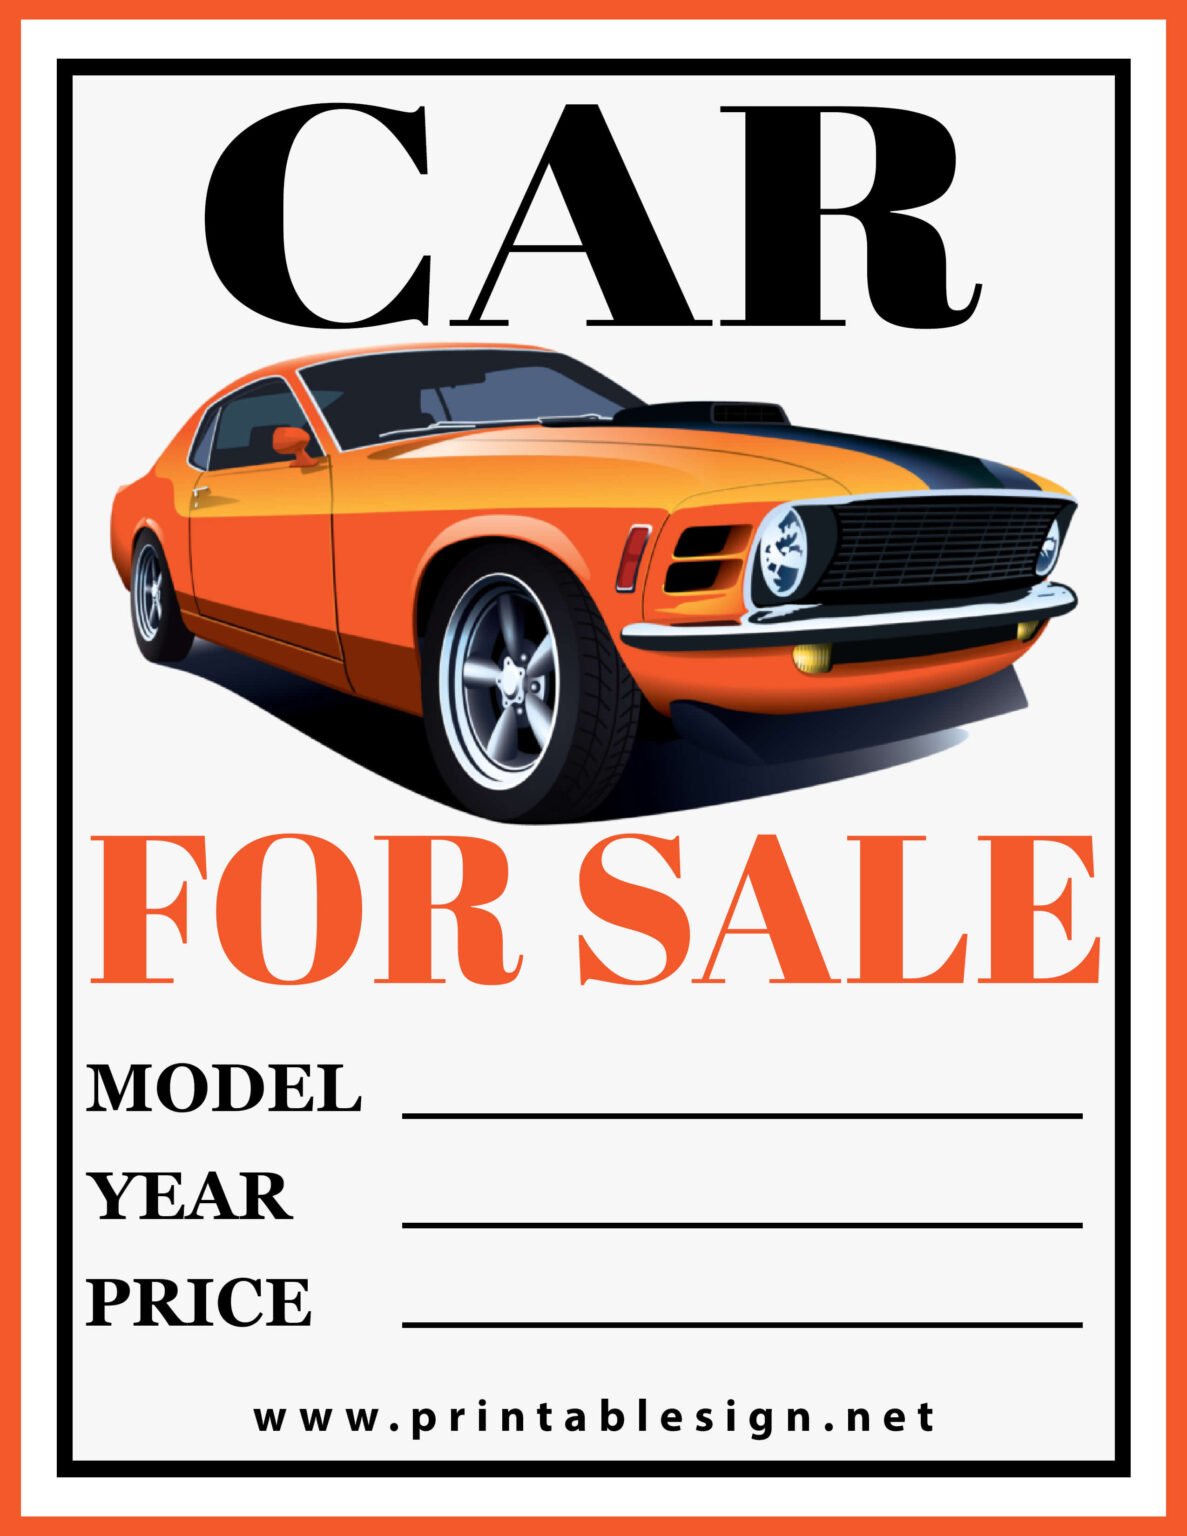 car-for-sale-printable-sign-pack-printable-signs